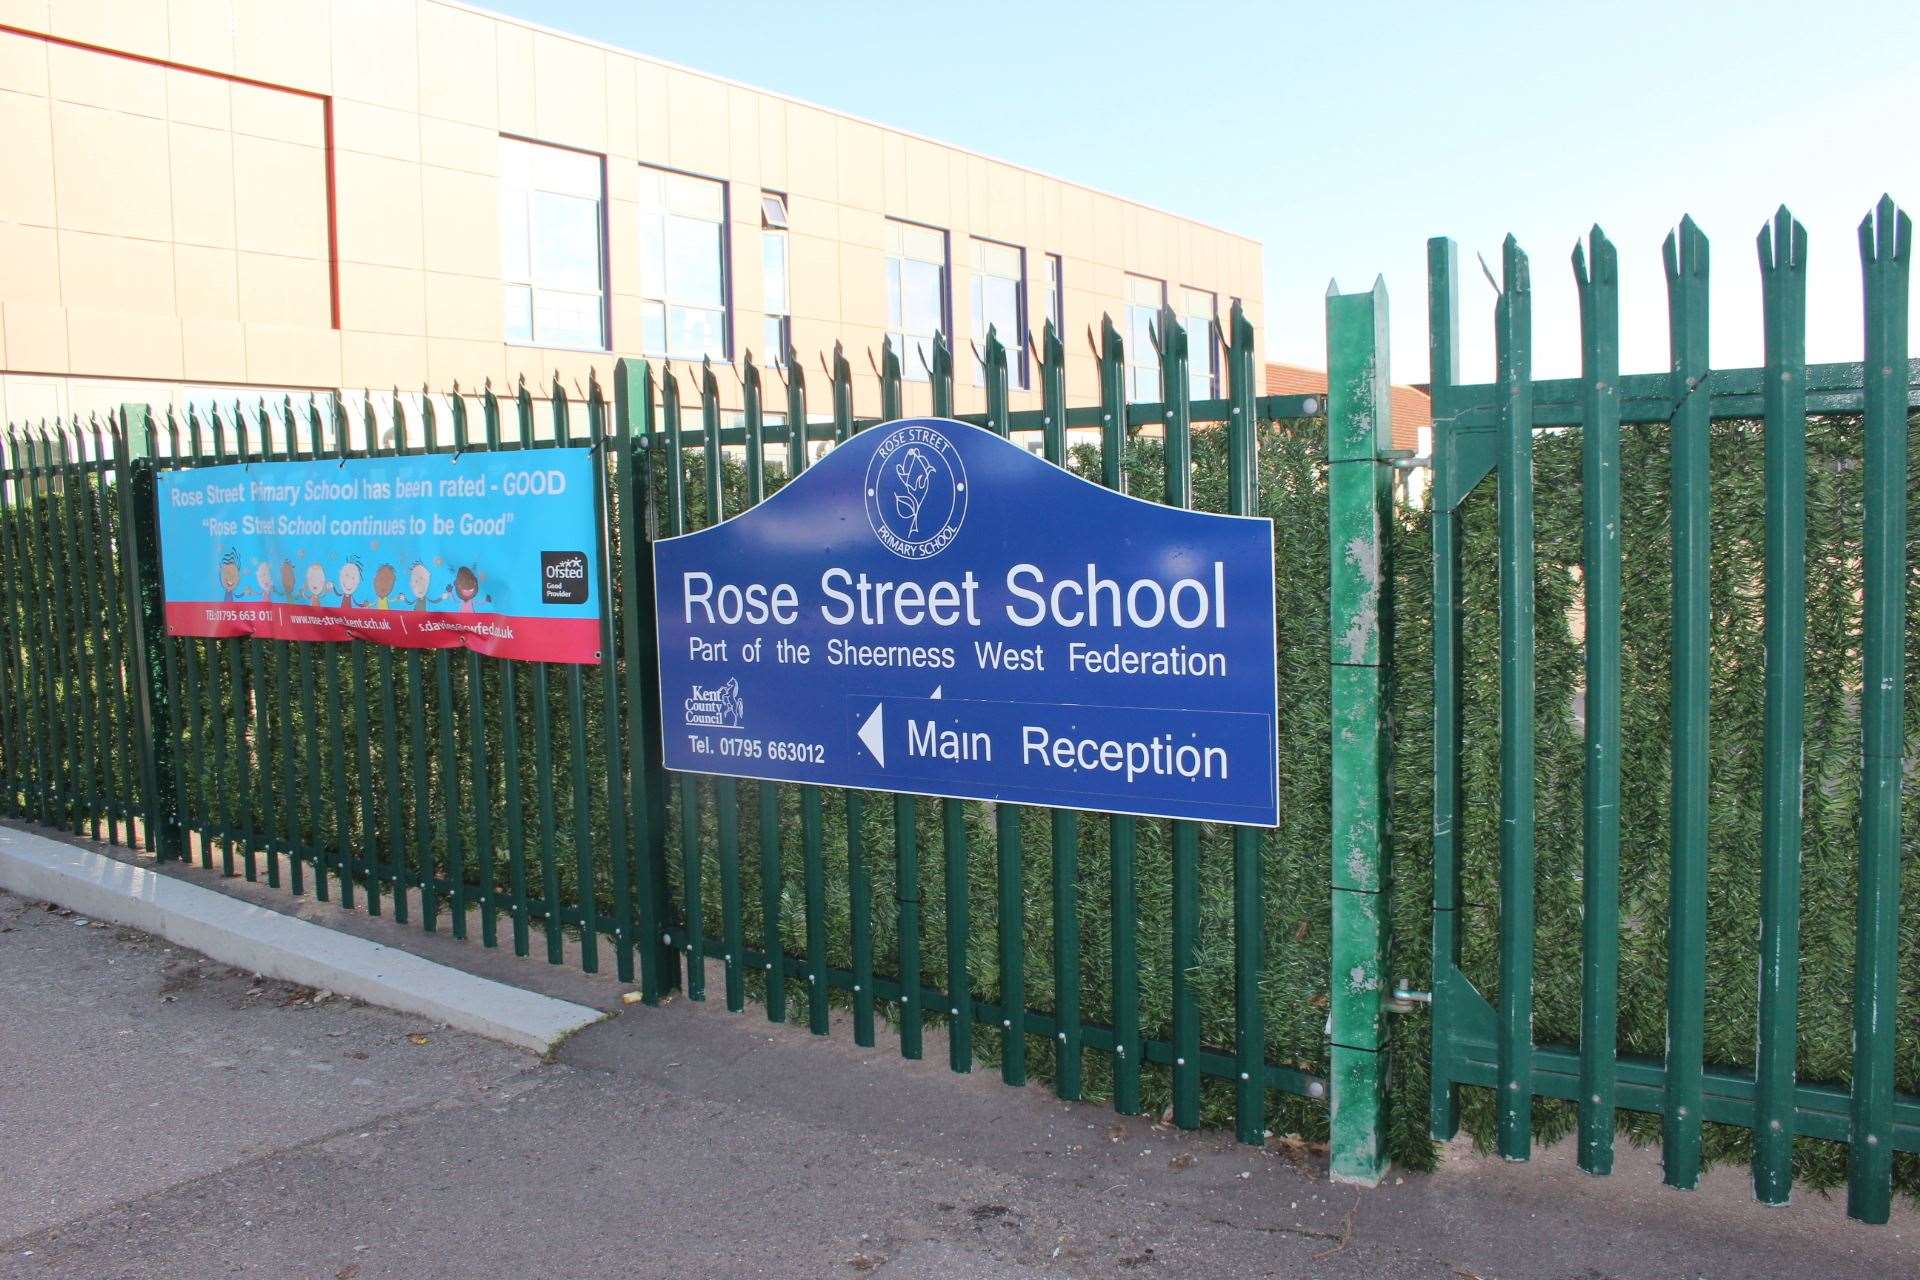 133 pupils from Rose Street Primary School, Sheerness, have been told to self isolate